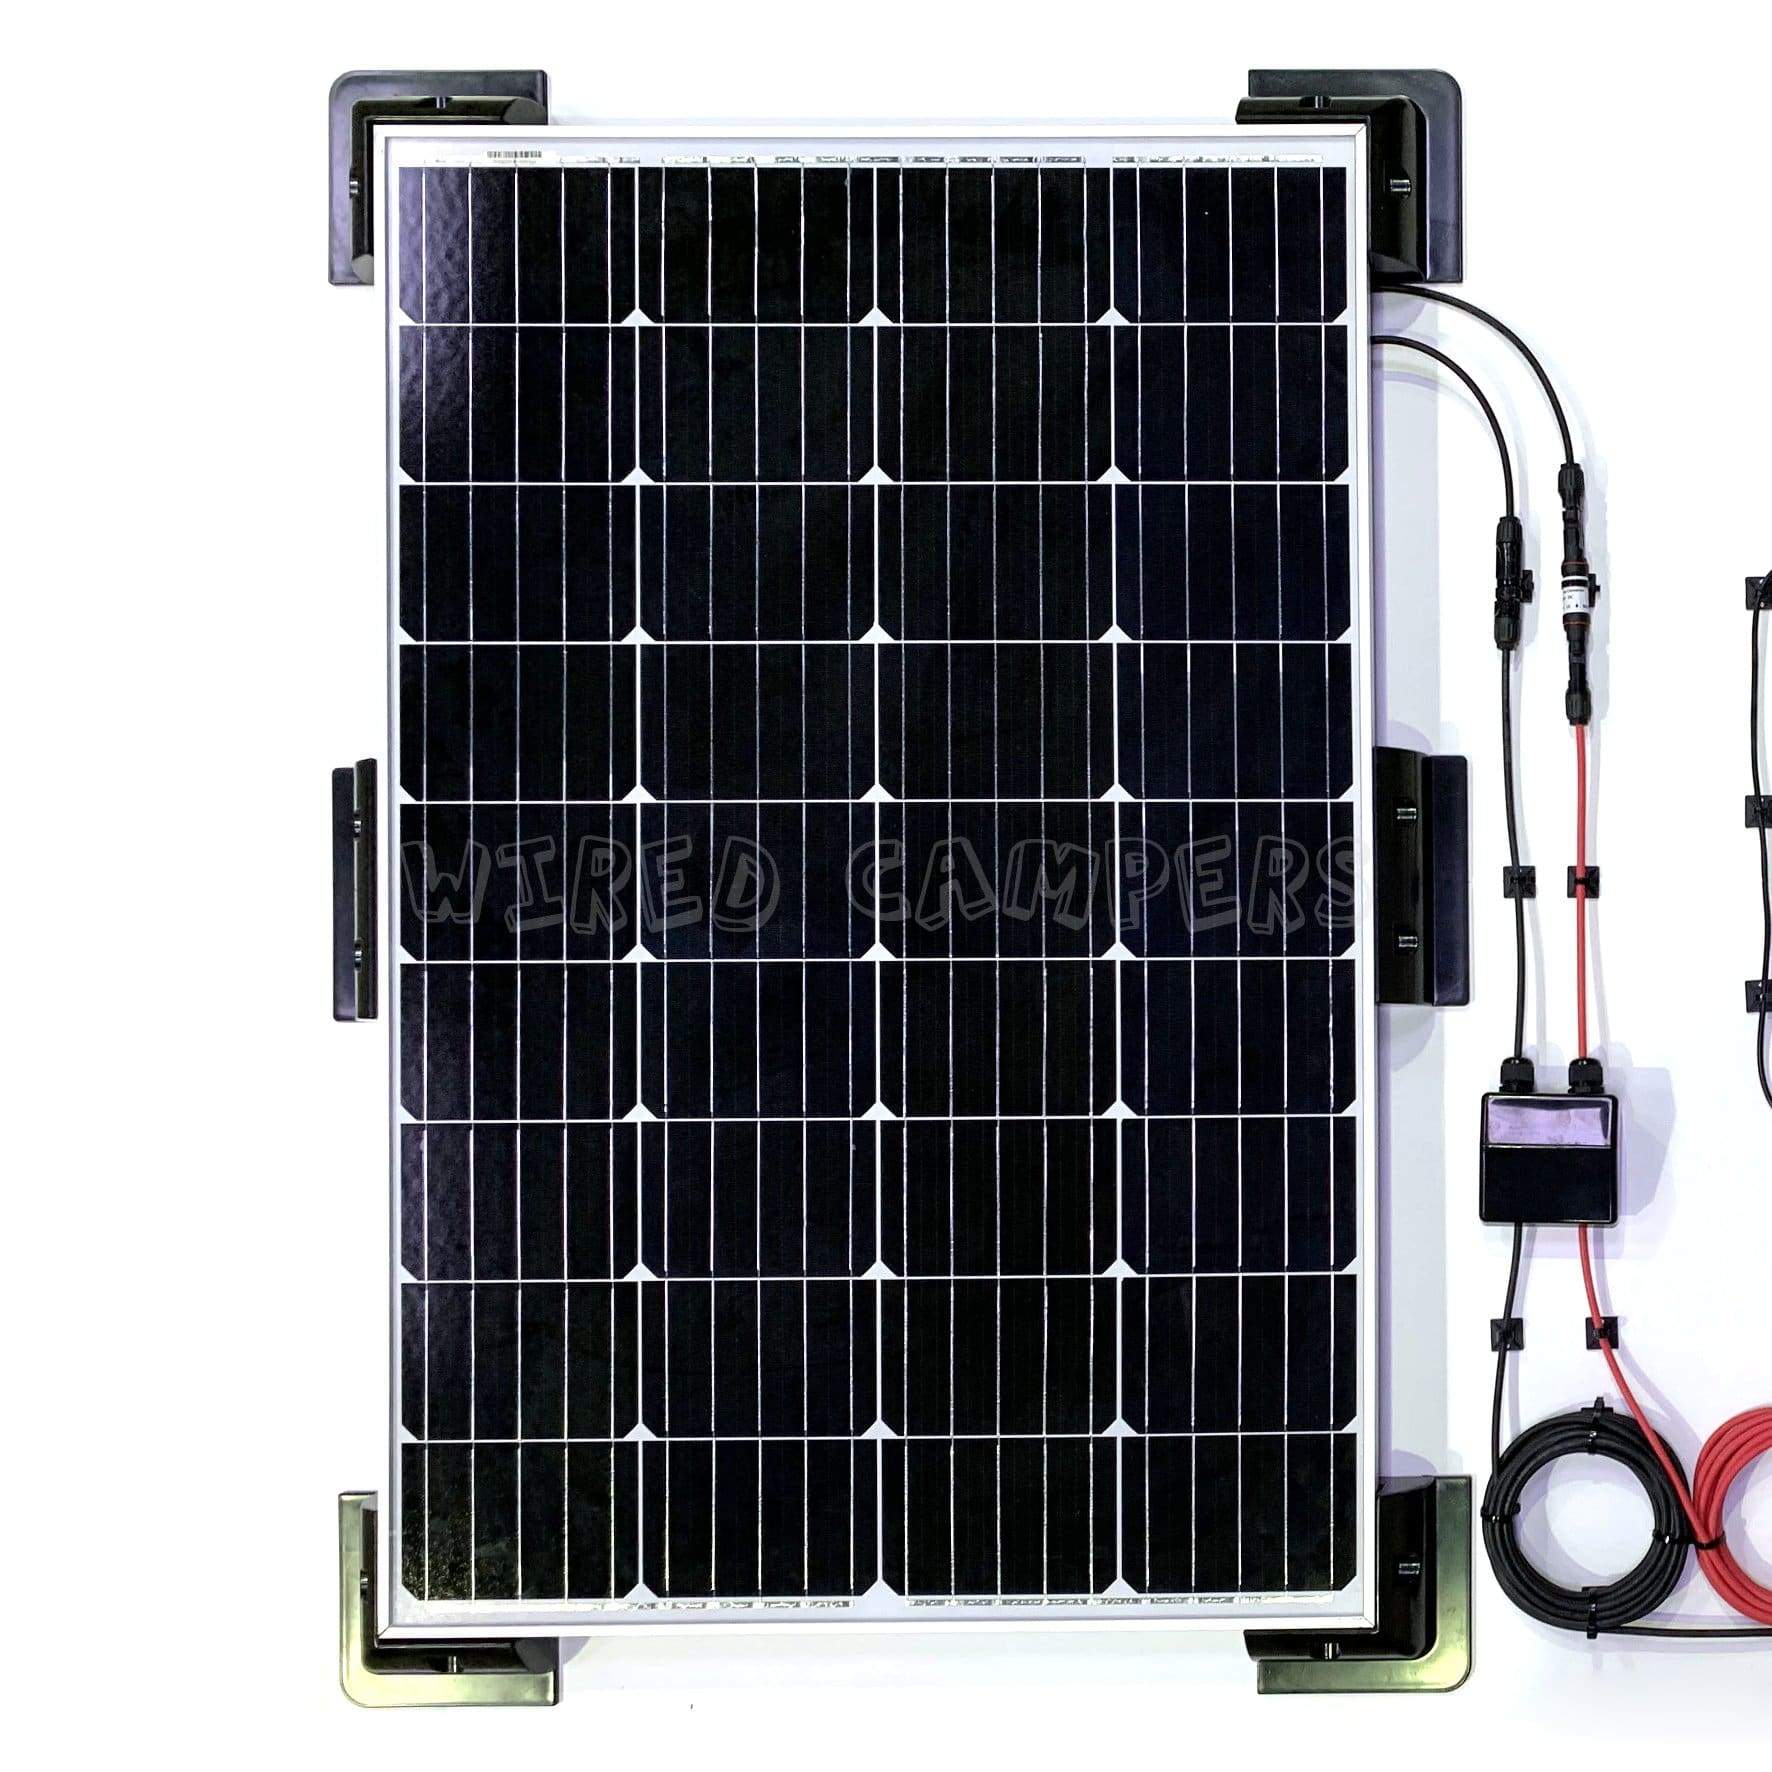 Wired Campers 10A EPEVER MPPT & Victron Energy 140W BlueSolar Mono Solar Panel Camper Van Kit